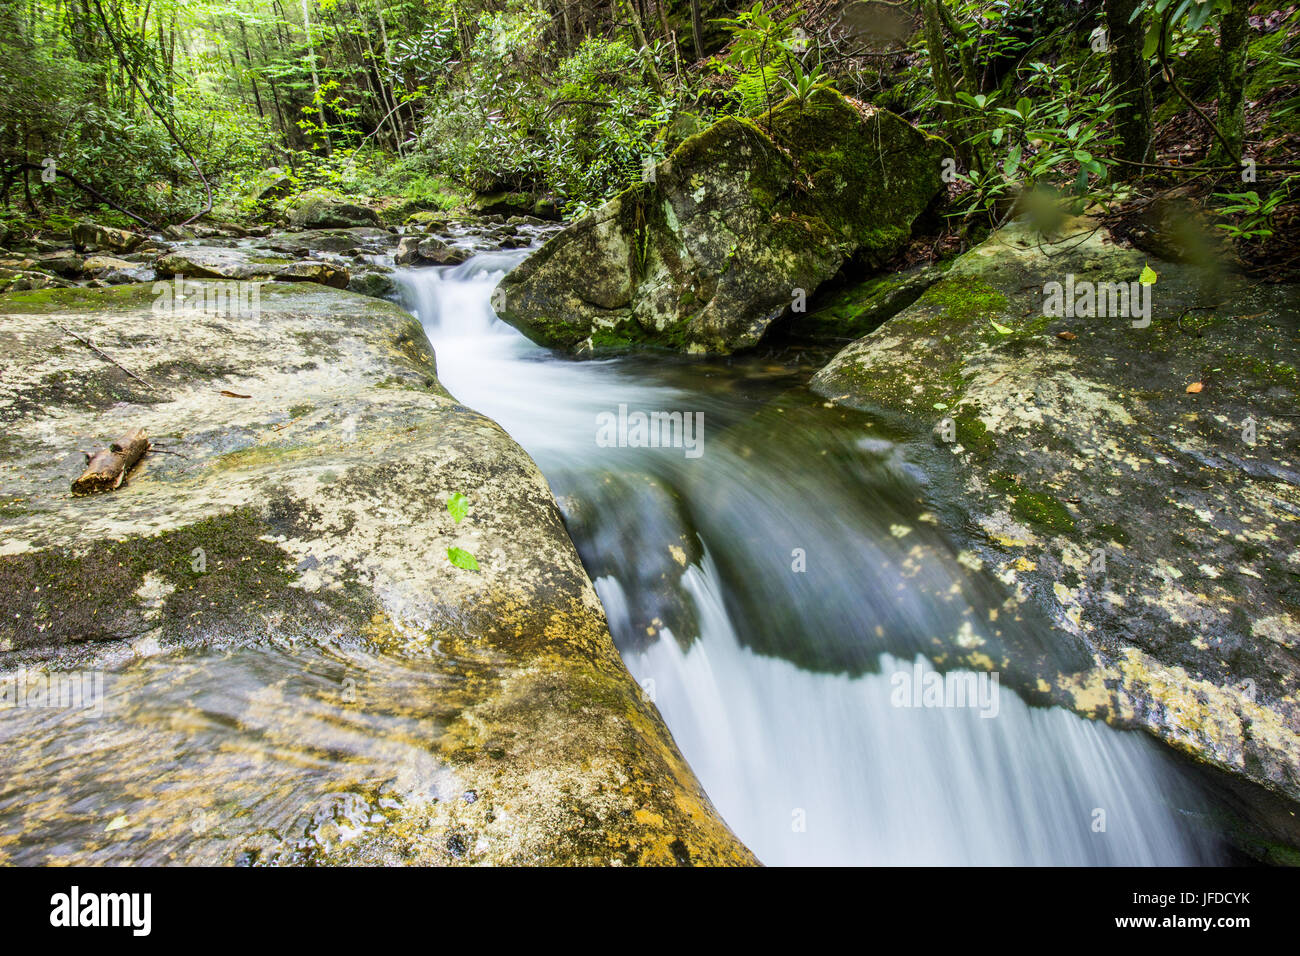 A stream carries clean, clear water through a pristine forest. Stock Photo